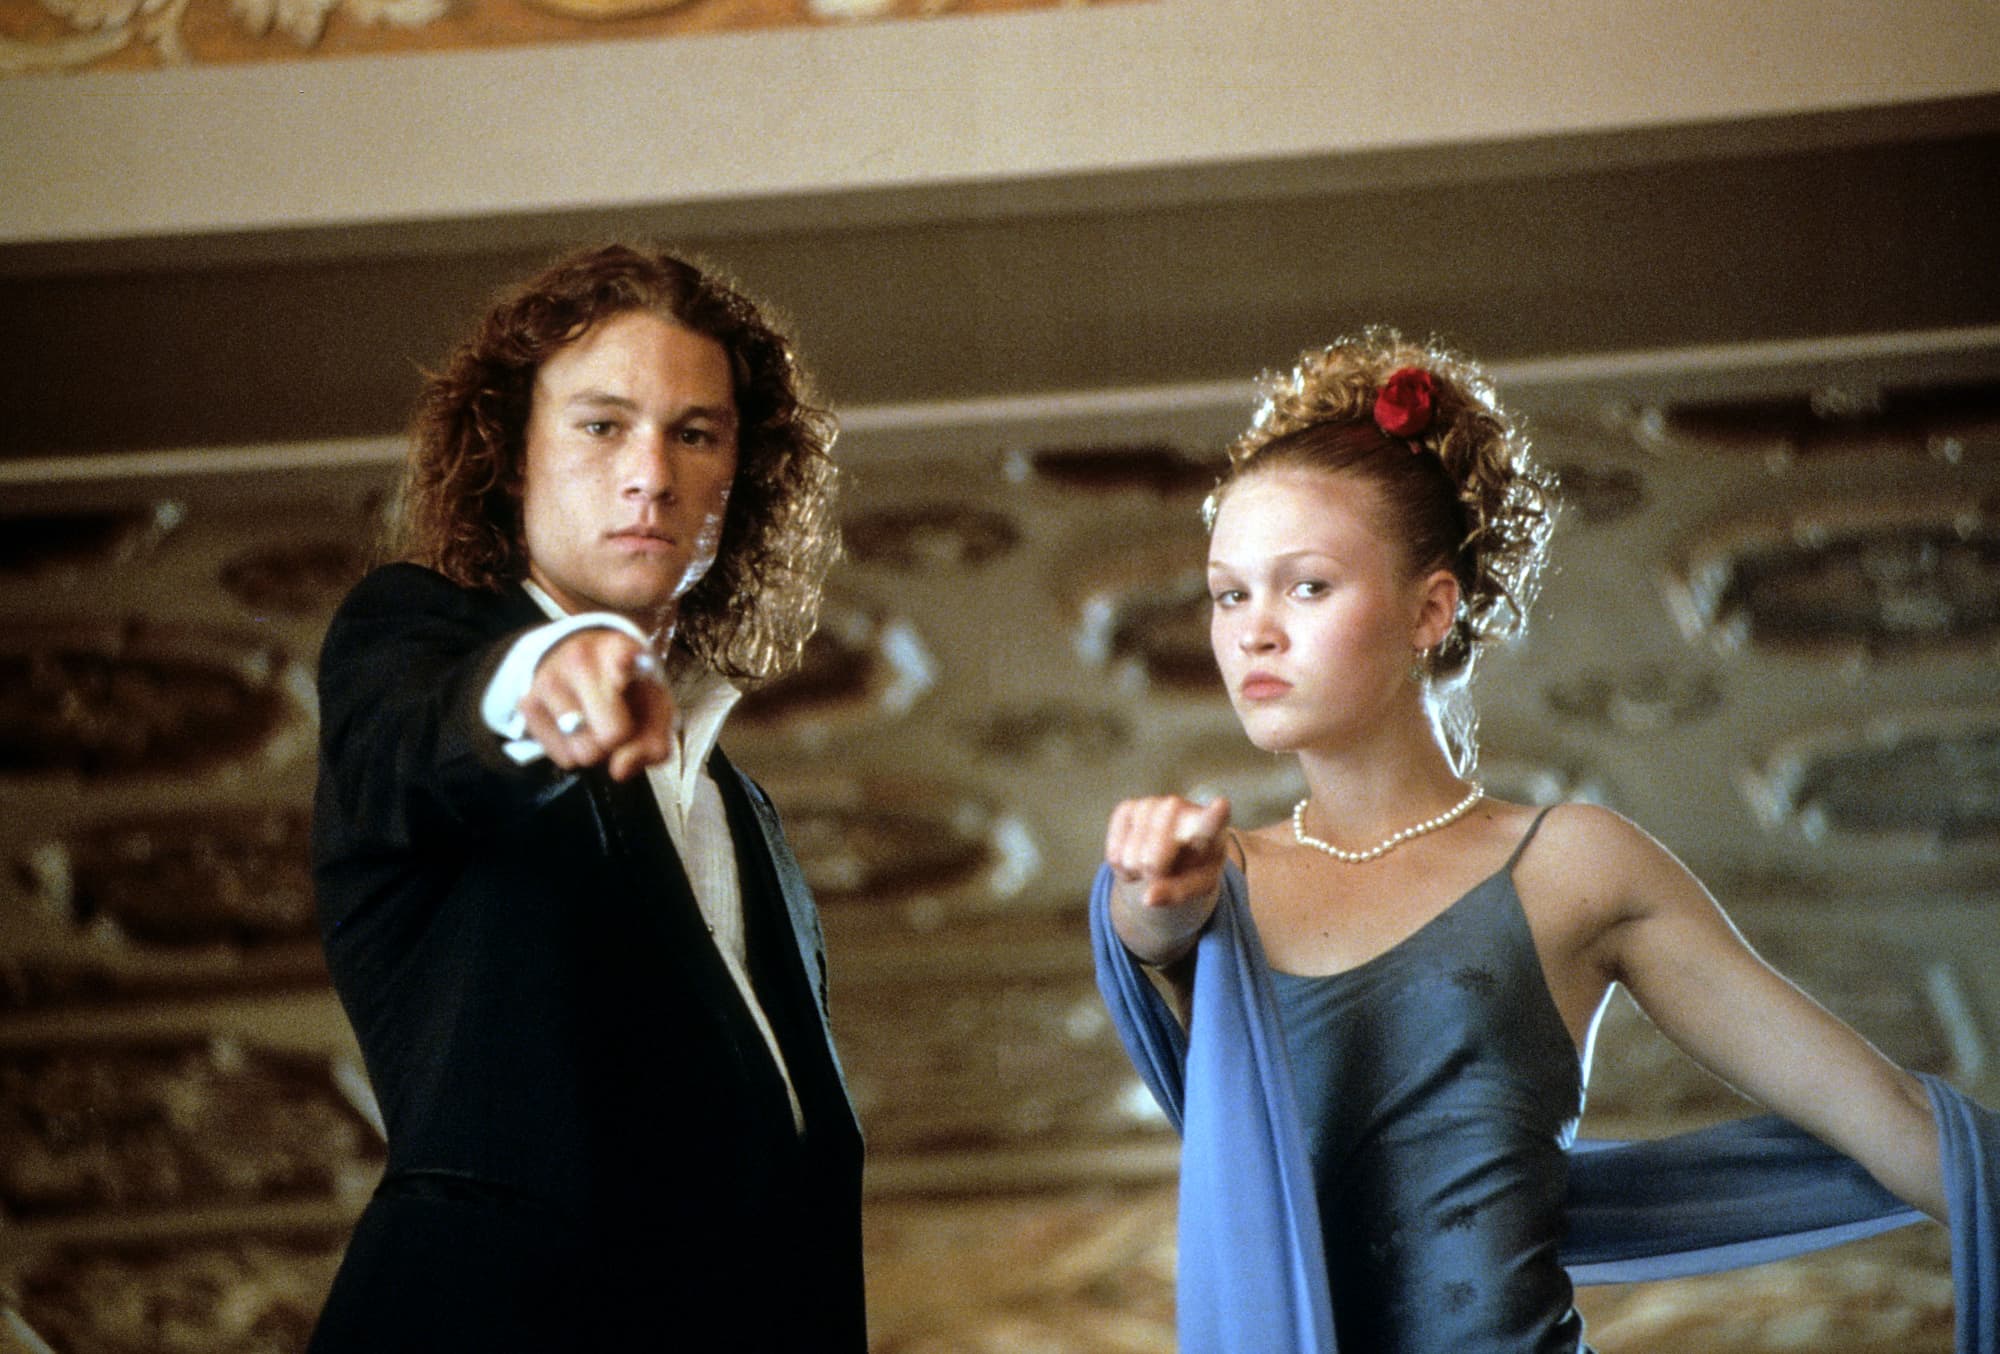 Fashion in the movie 10 things i hate about you: liberal, feminine and full of mischief of the 90s